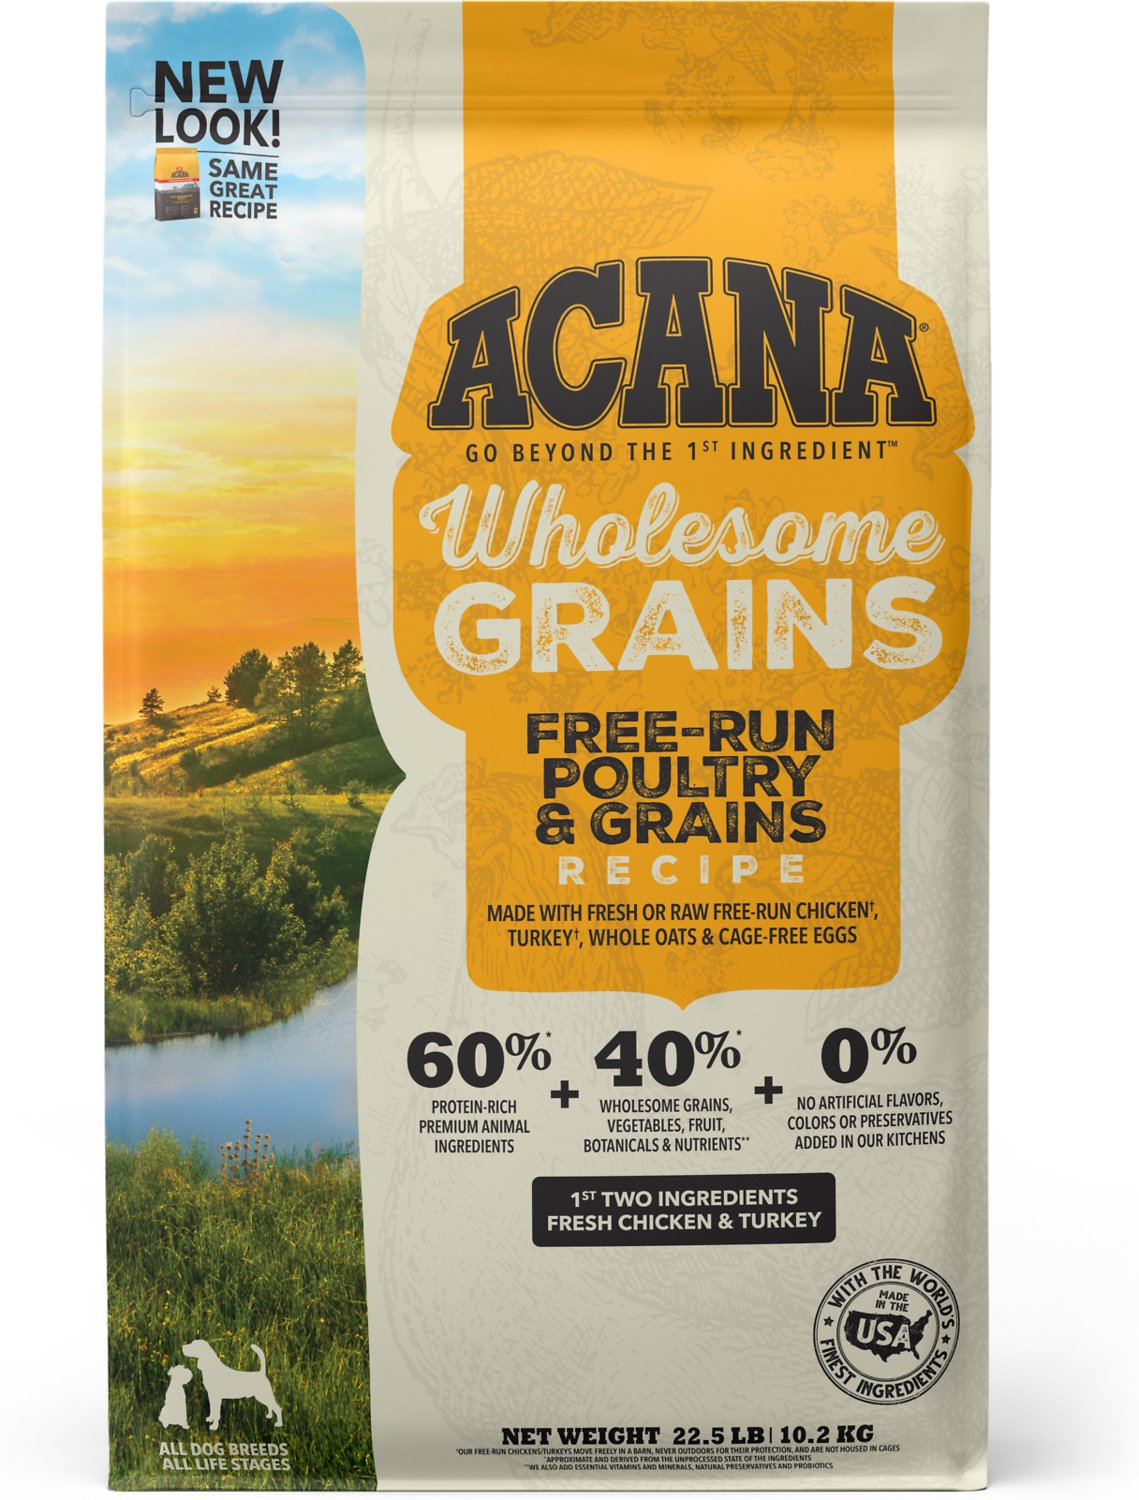 Acana Wholesome Grains Free-Run Poultry Recipe Dry Dog Food